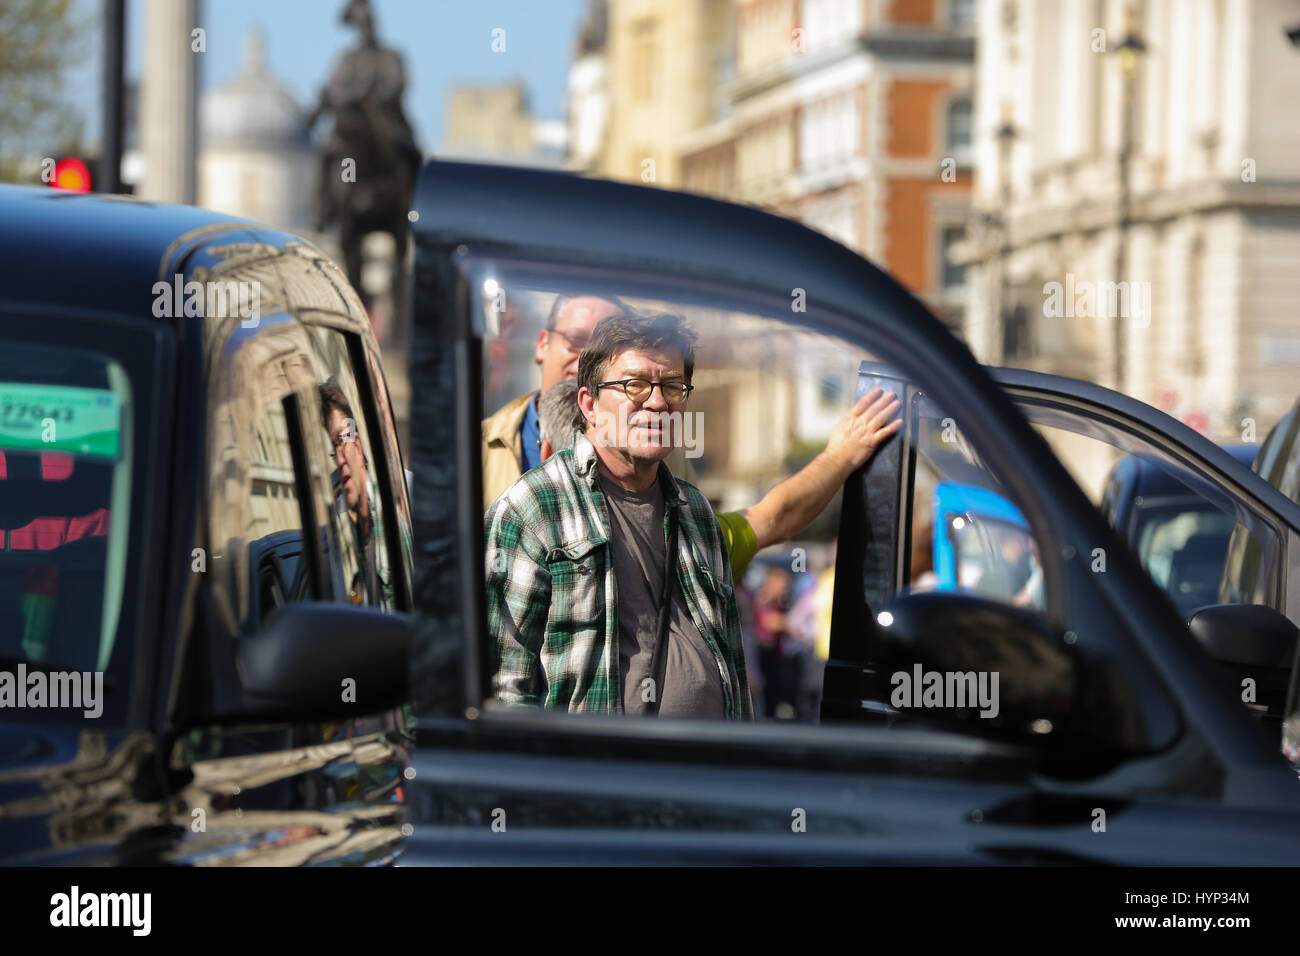 Whitehall. London. UK 6 Apr 2017. London Black Taxi drivers protest in London's Whitehall. The cabbies are demanding a parliamentary enquiry into the alleged relationship between former Prime Minister David Cameron and George Osborne and their links to private hire company Uber. Credit: Dinendra Haria/Alamy Live News Stock Photo